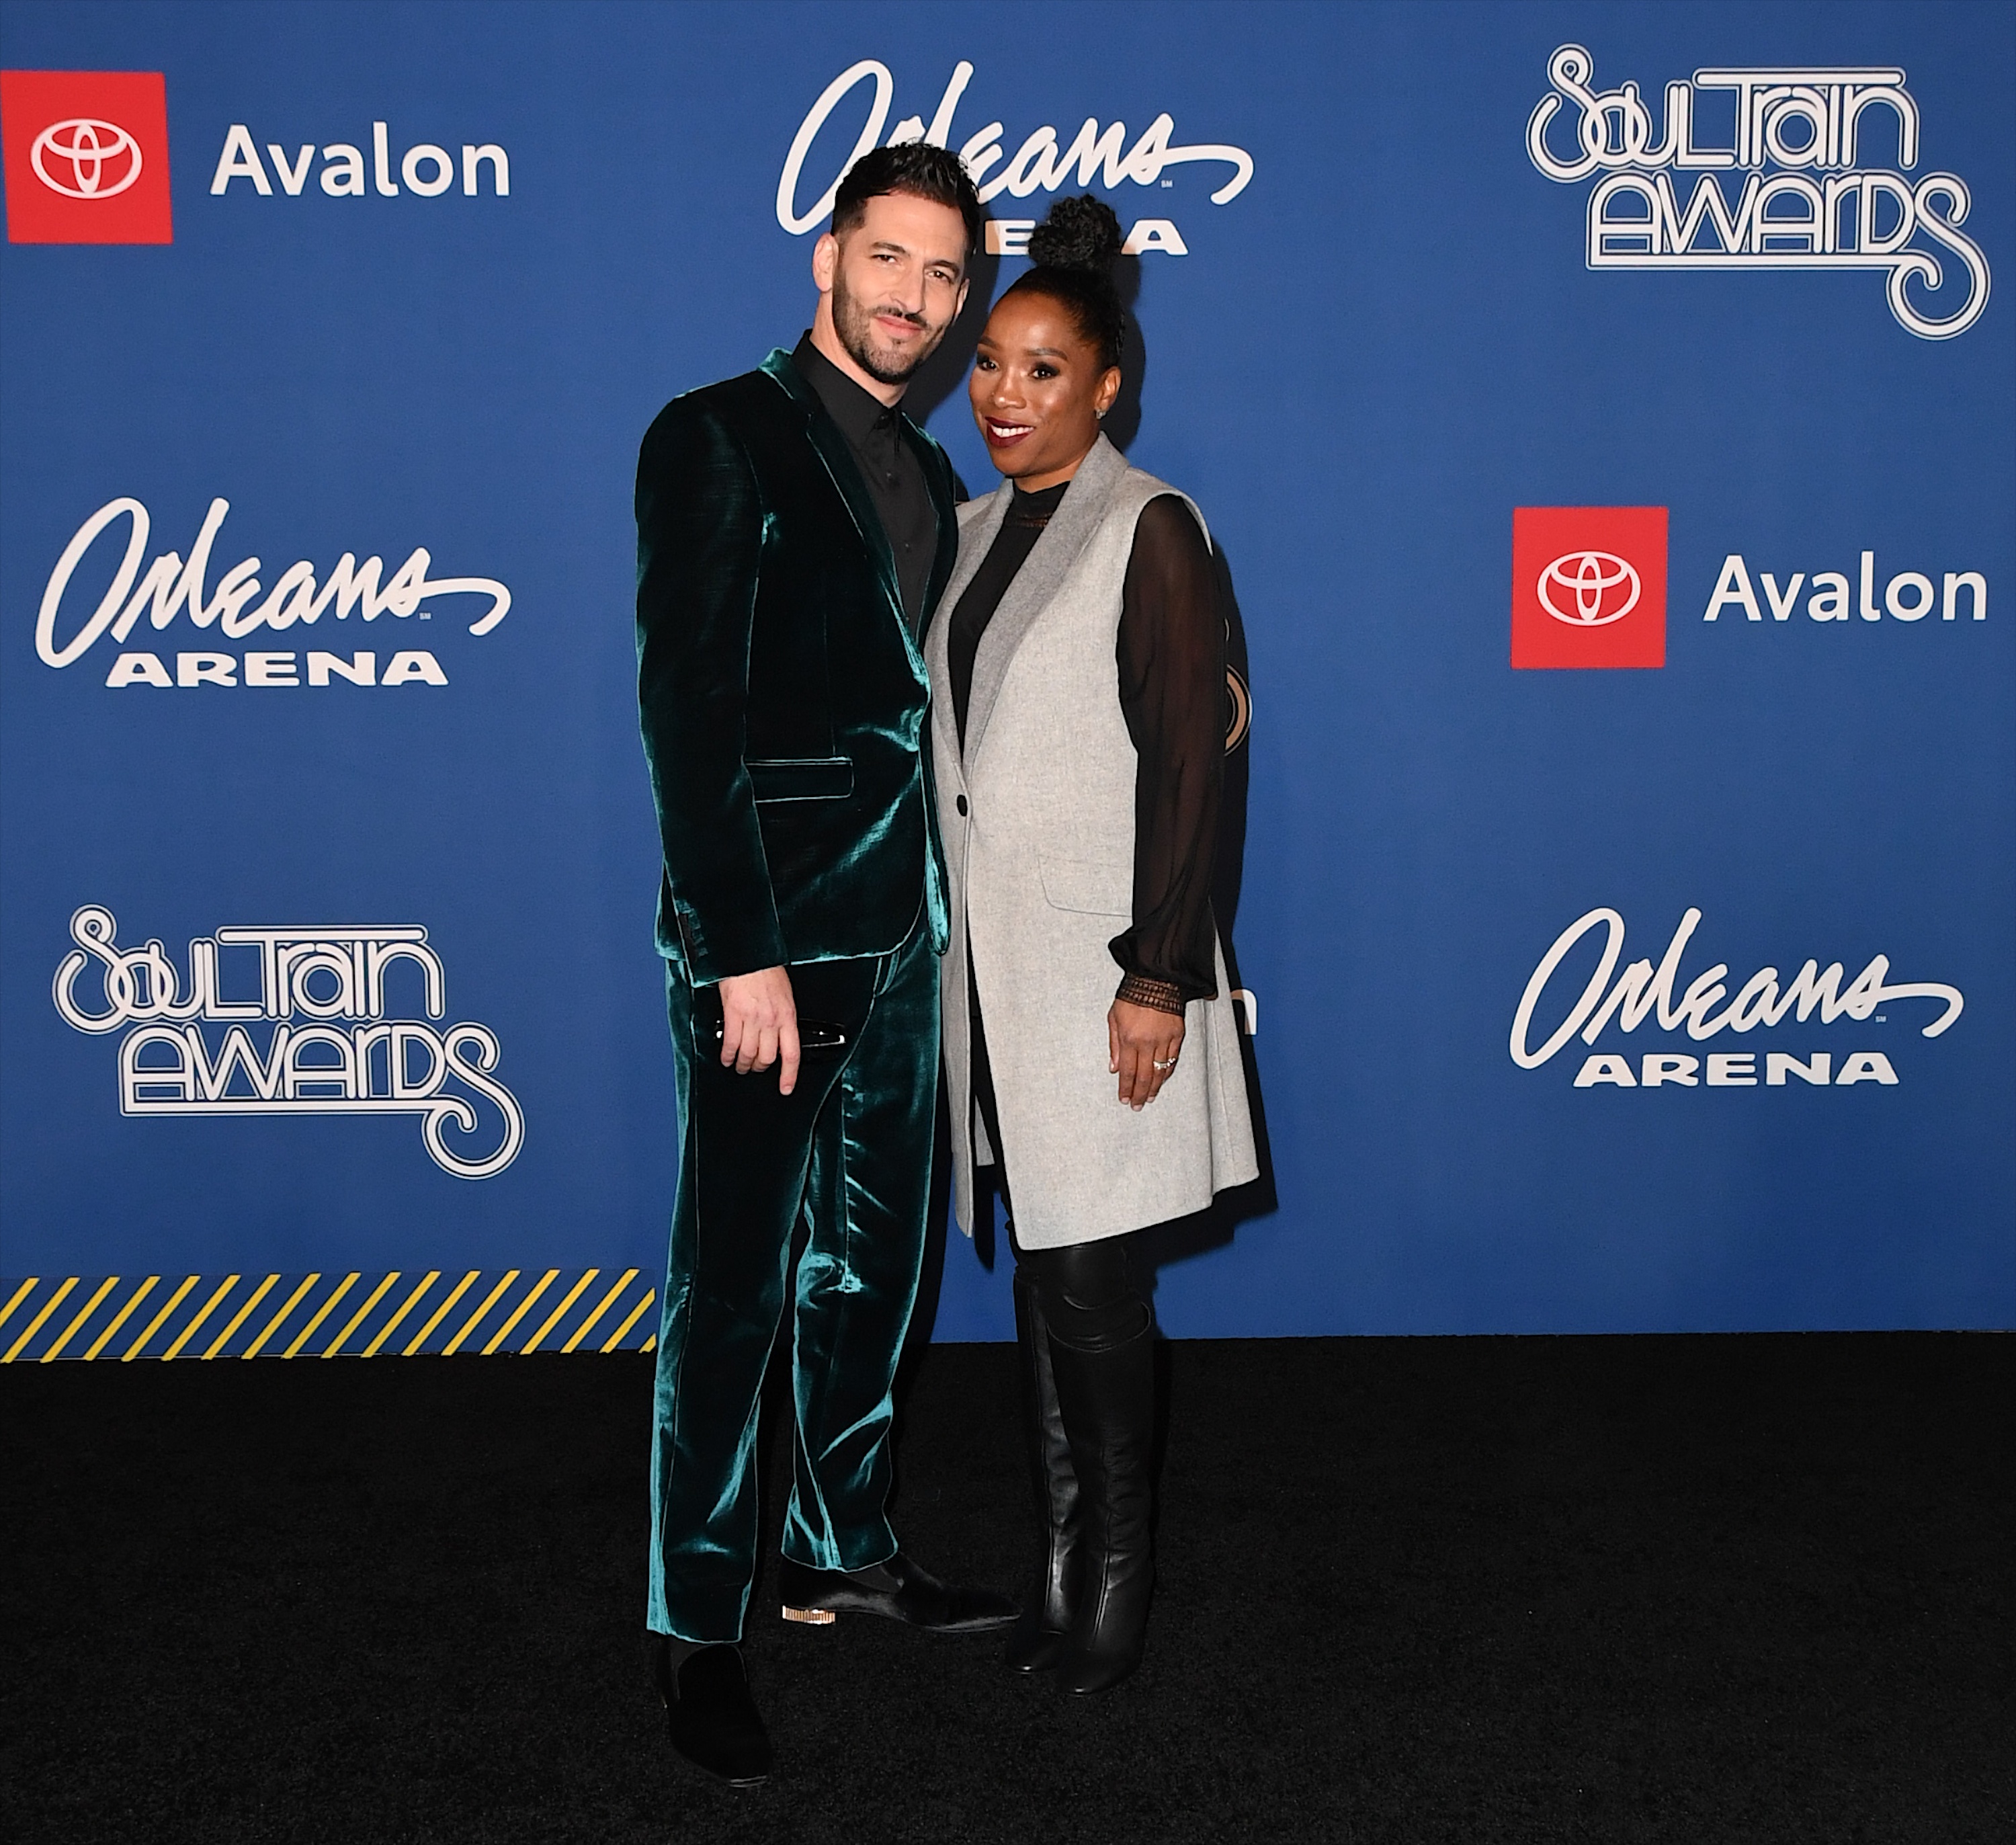 Jon B. and Danette Jackson attend the 2018 Soul Train Awards at the Orleans Arena, on November 17, 2018, in Las Vegas, Nevada. | Source: Getty Images